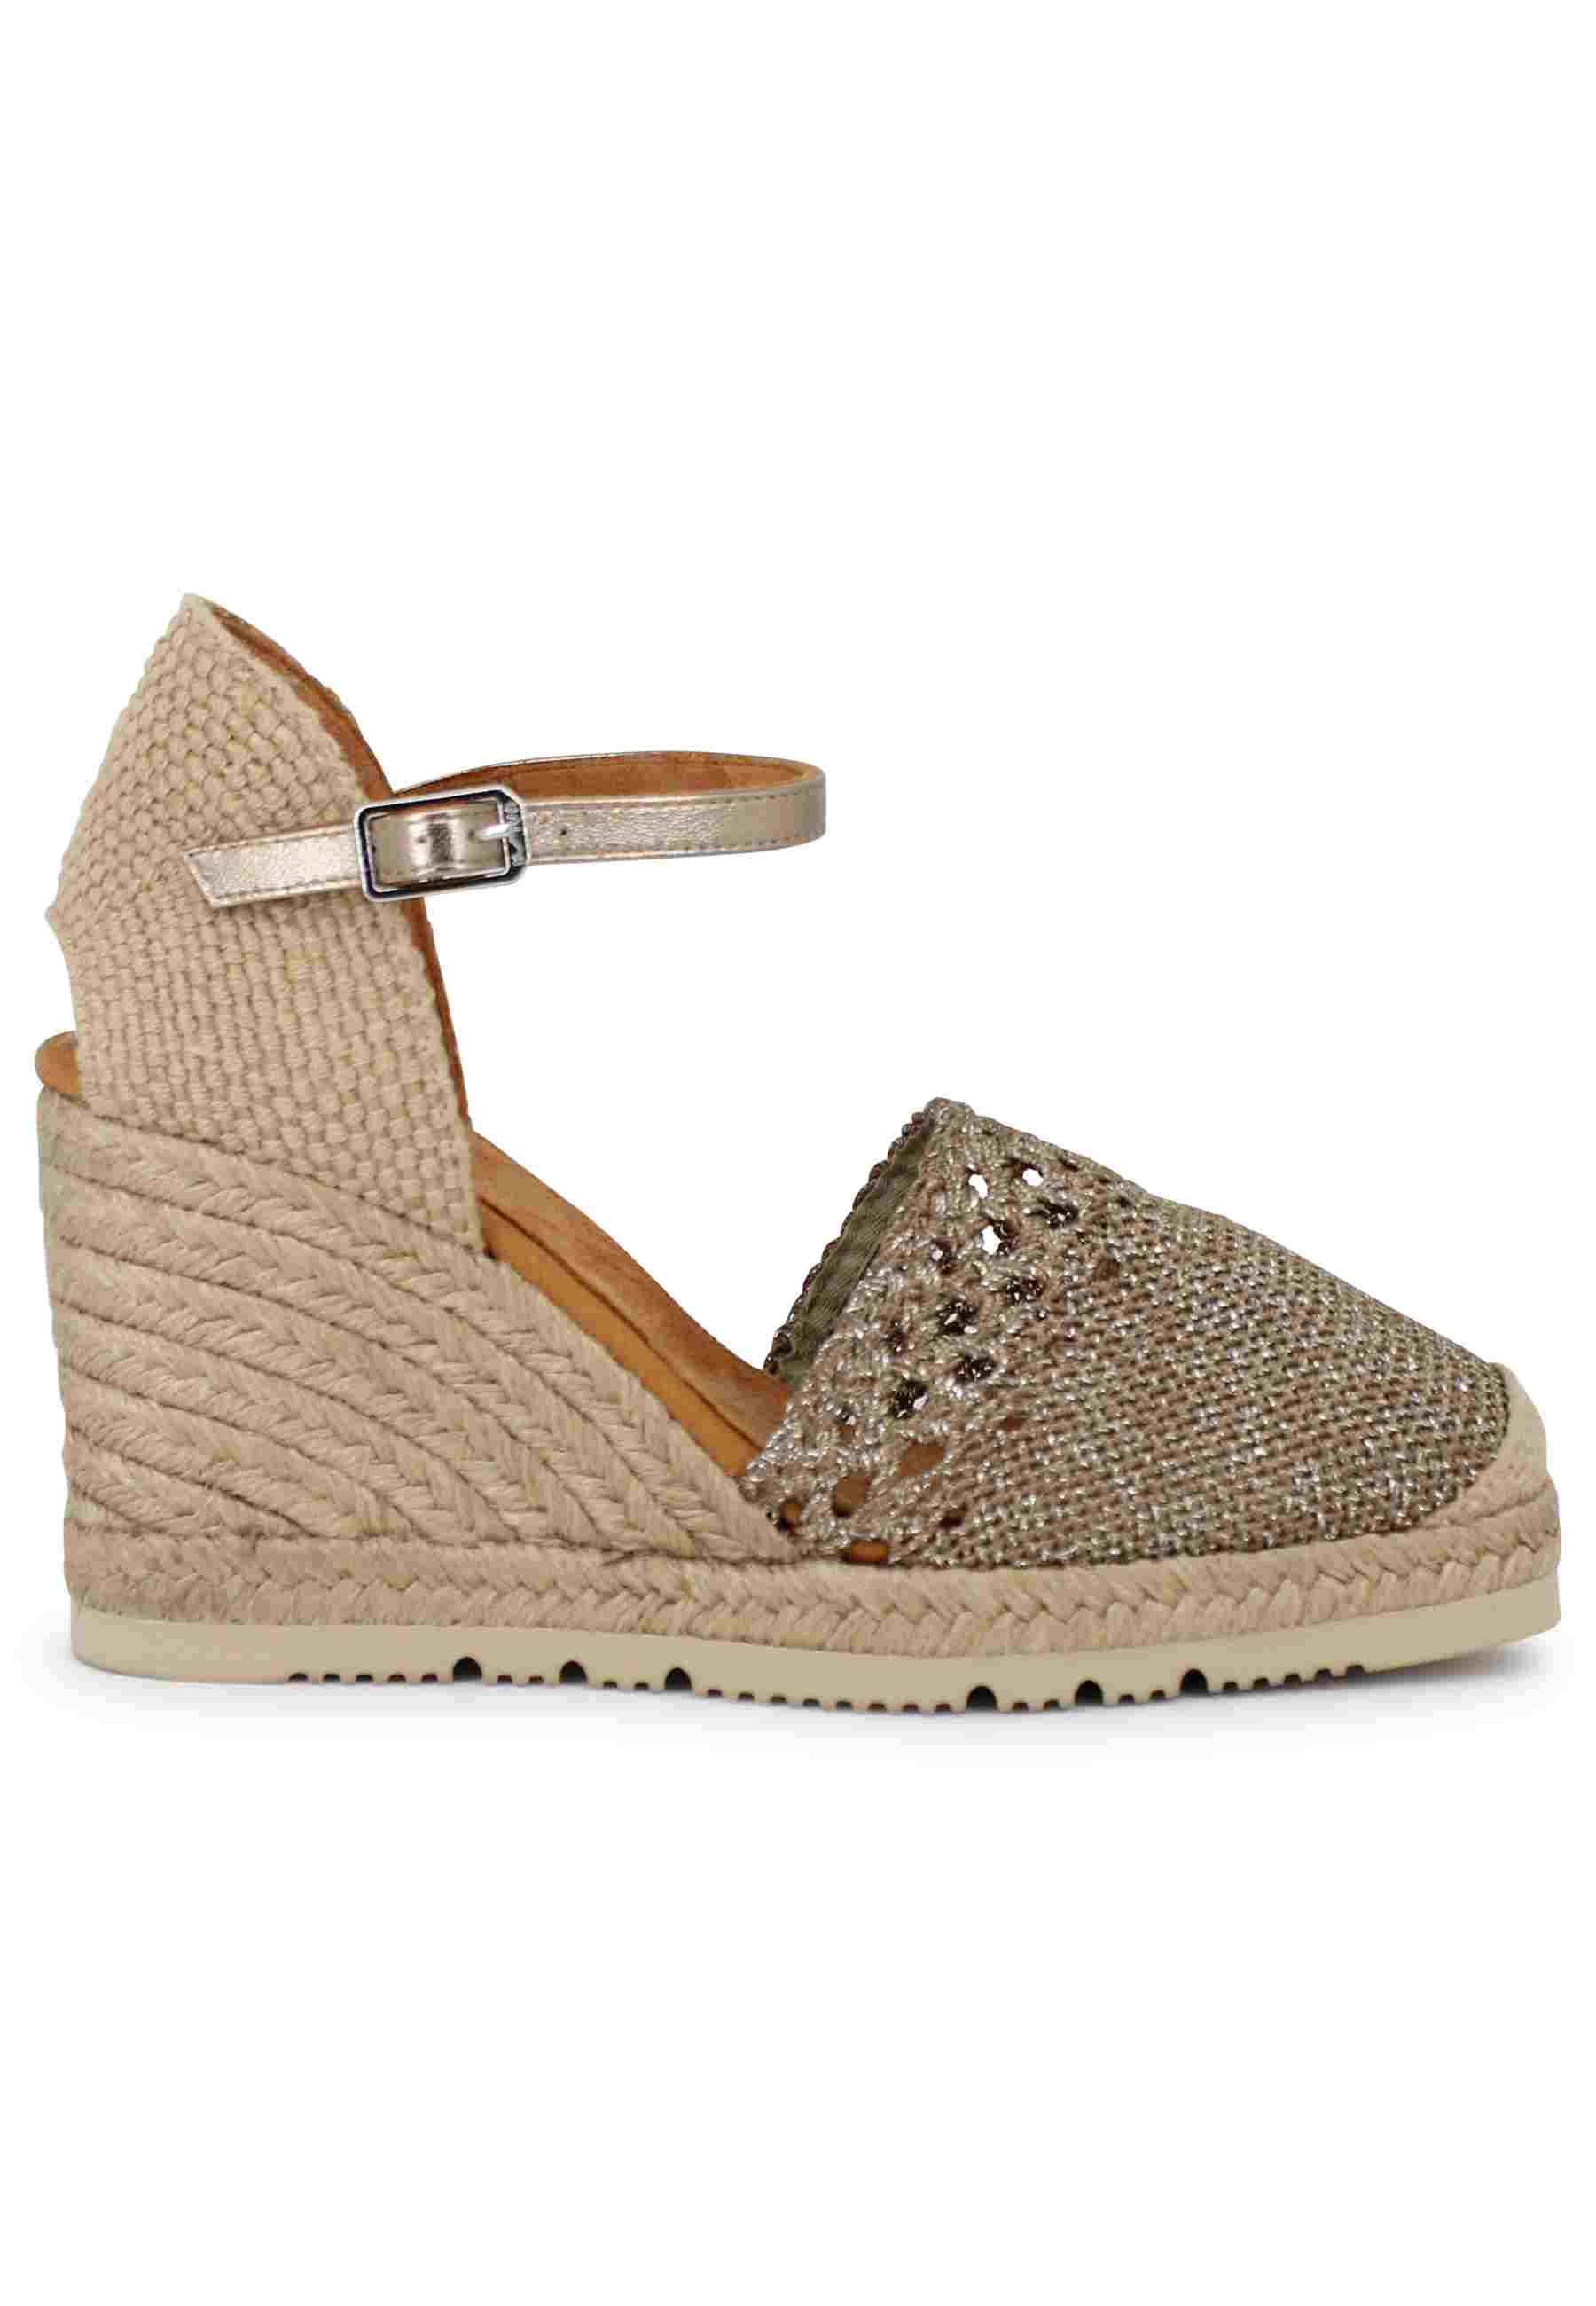 Women's espadrille sandals in bronze laminated fabric with ankle strap and high wedge